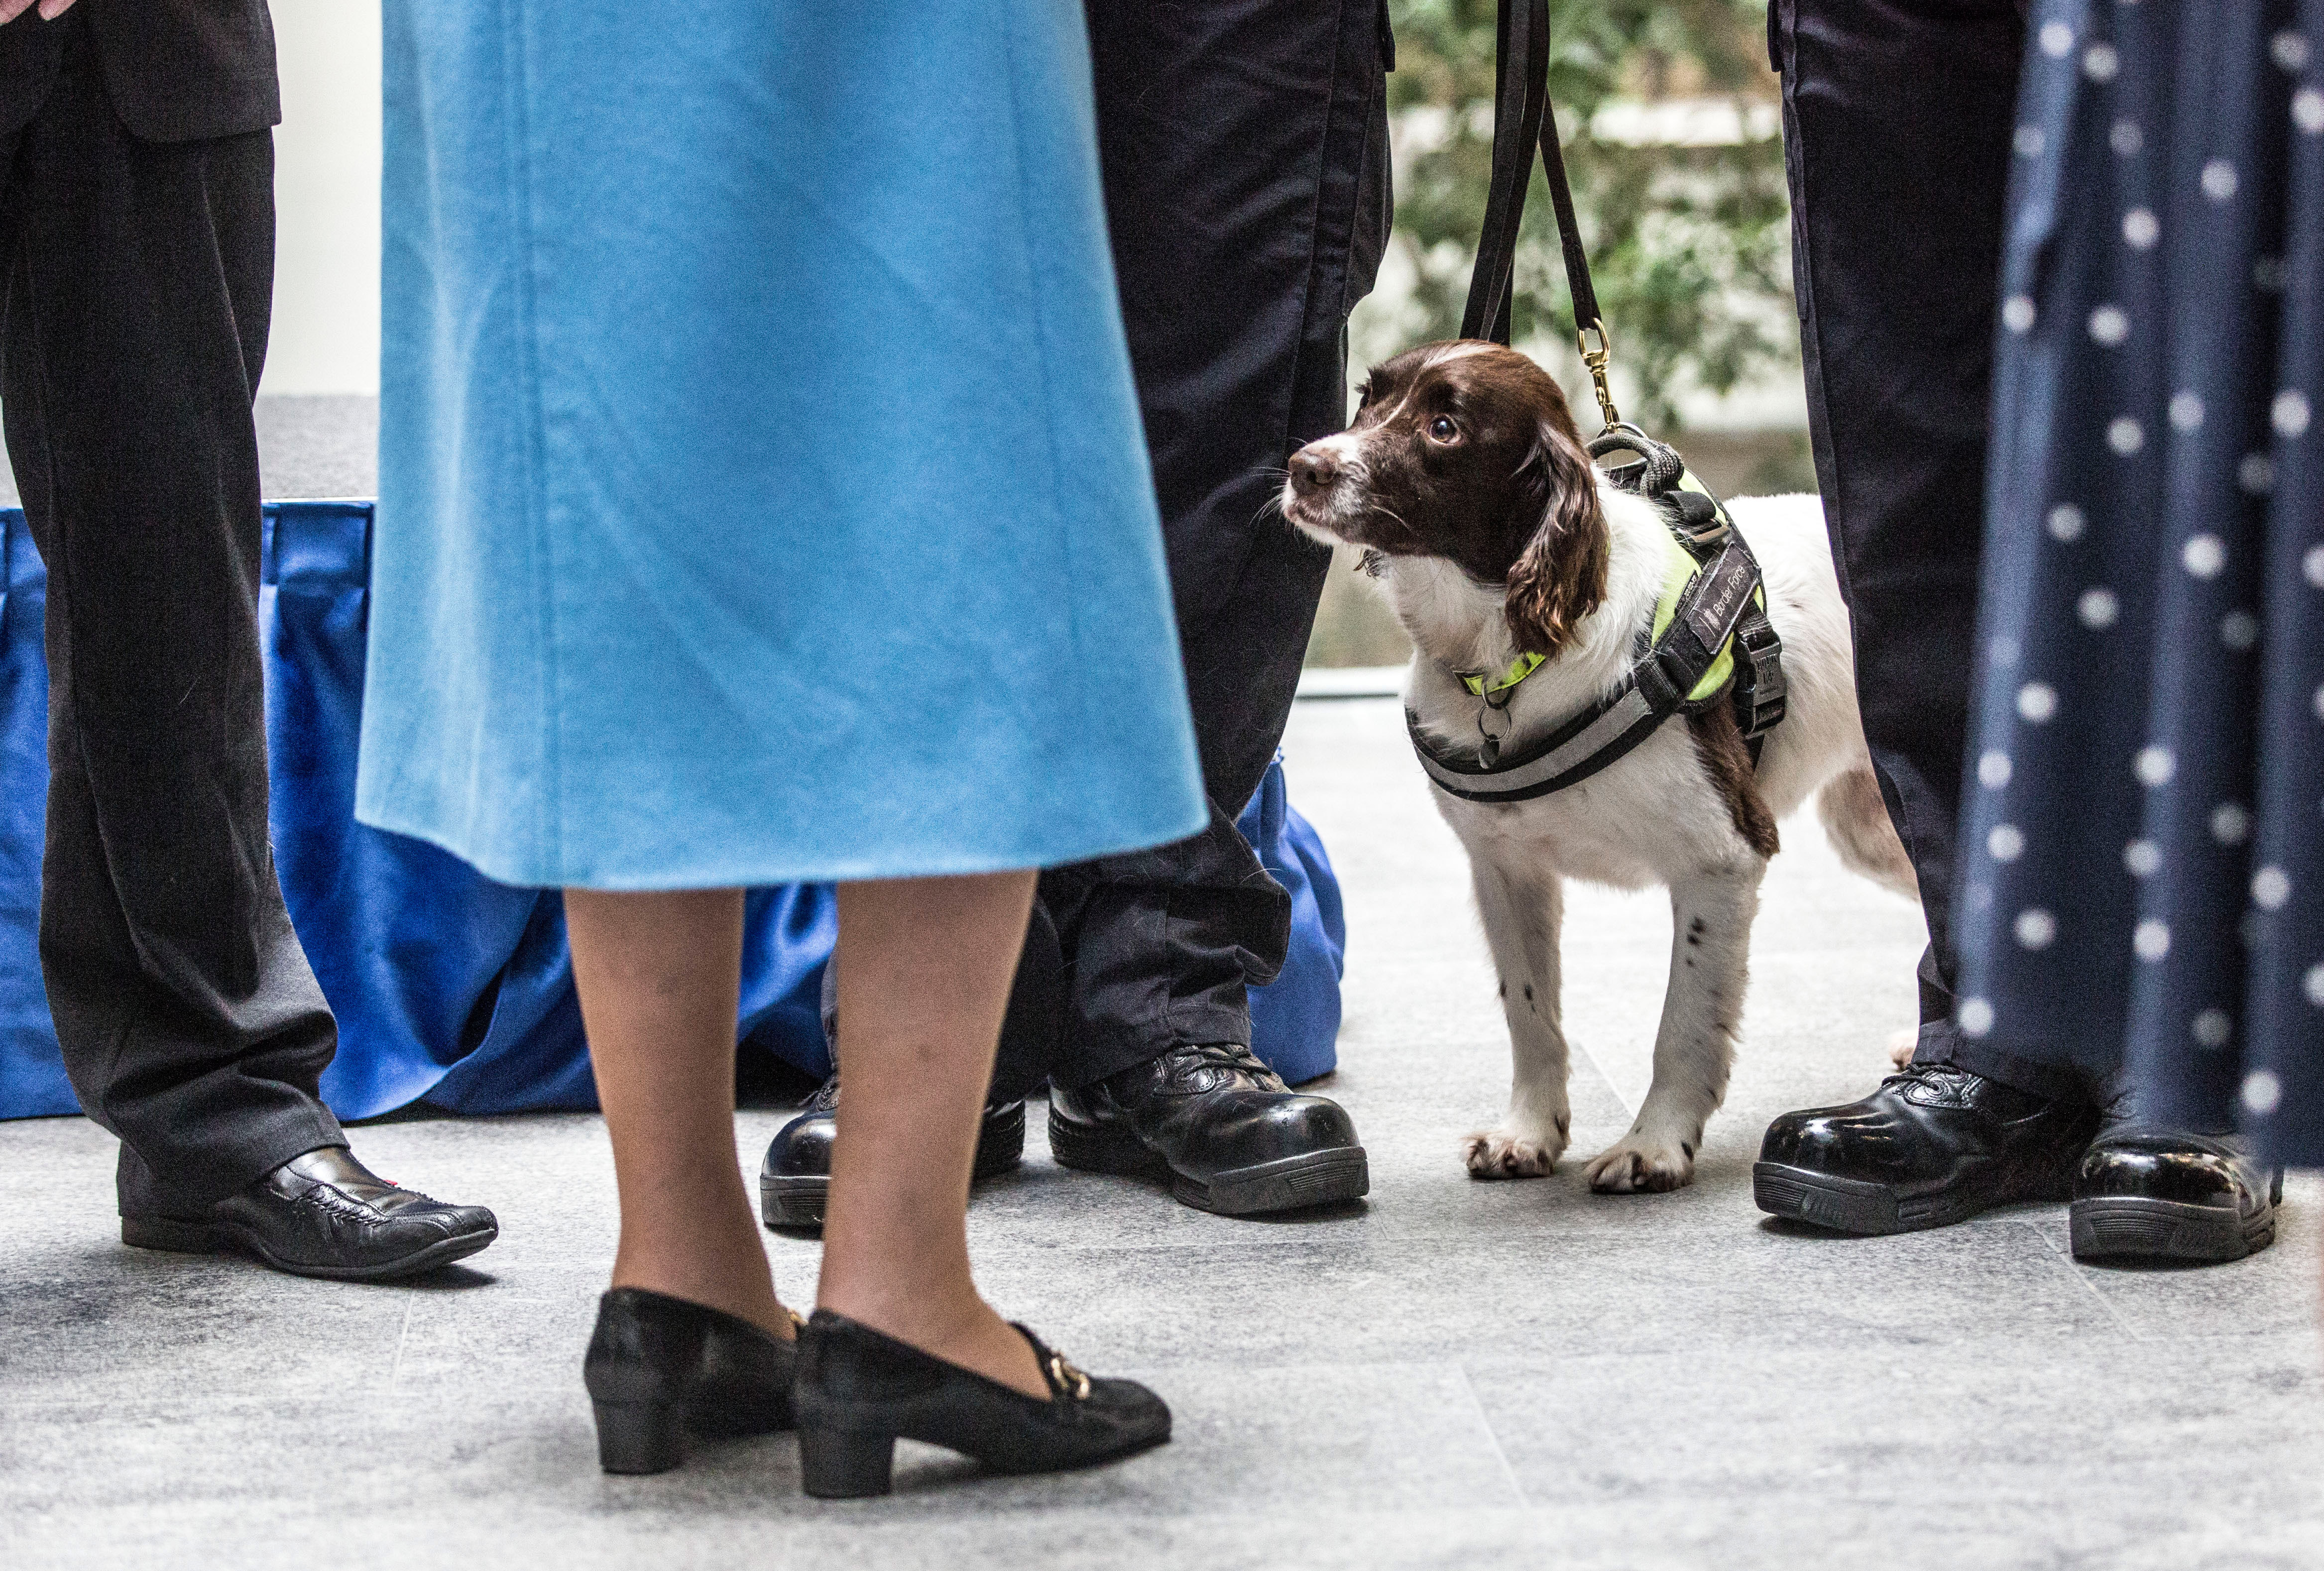 Ruby the narcotics and money sniffer dog looks on as Queen Elizabeth II tours the Home Office building on Nov.12, 2015 in London, England. (Richard Pohle—WPA Pool/Getty Images)